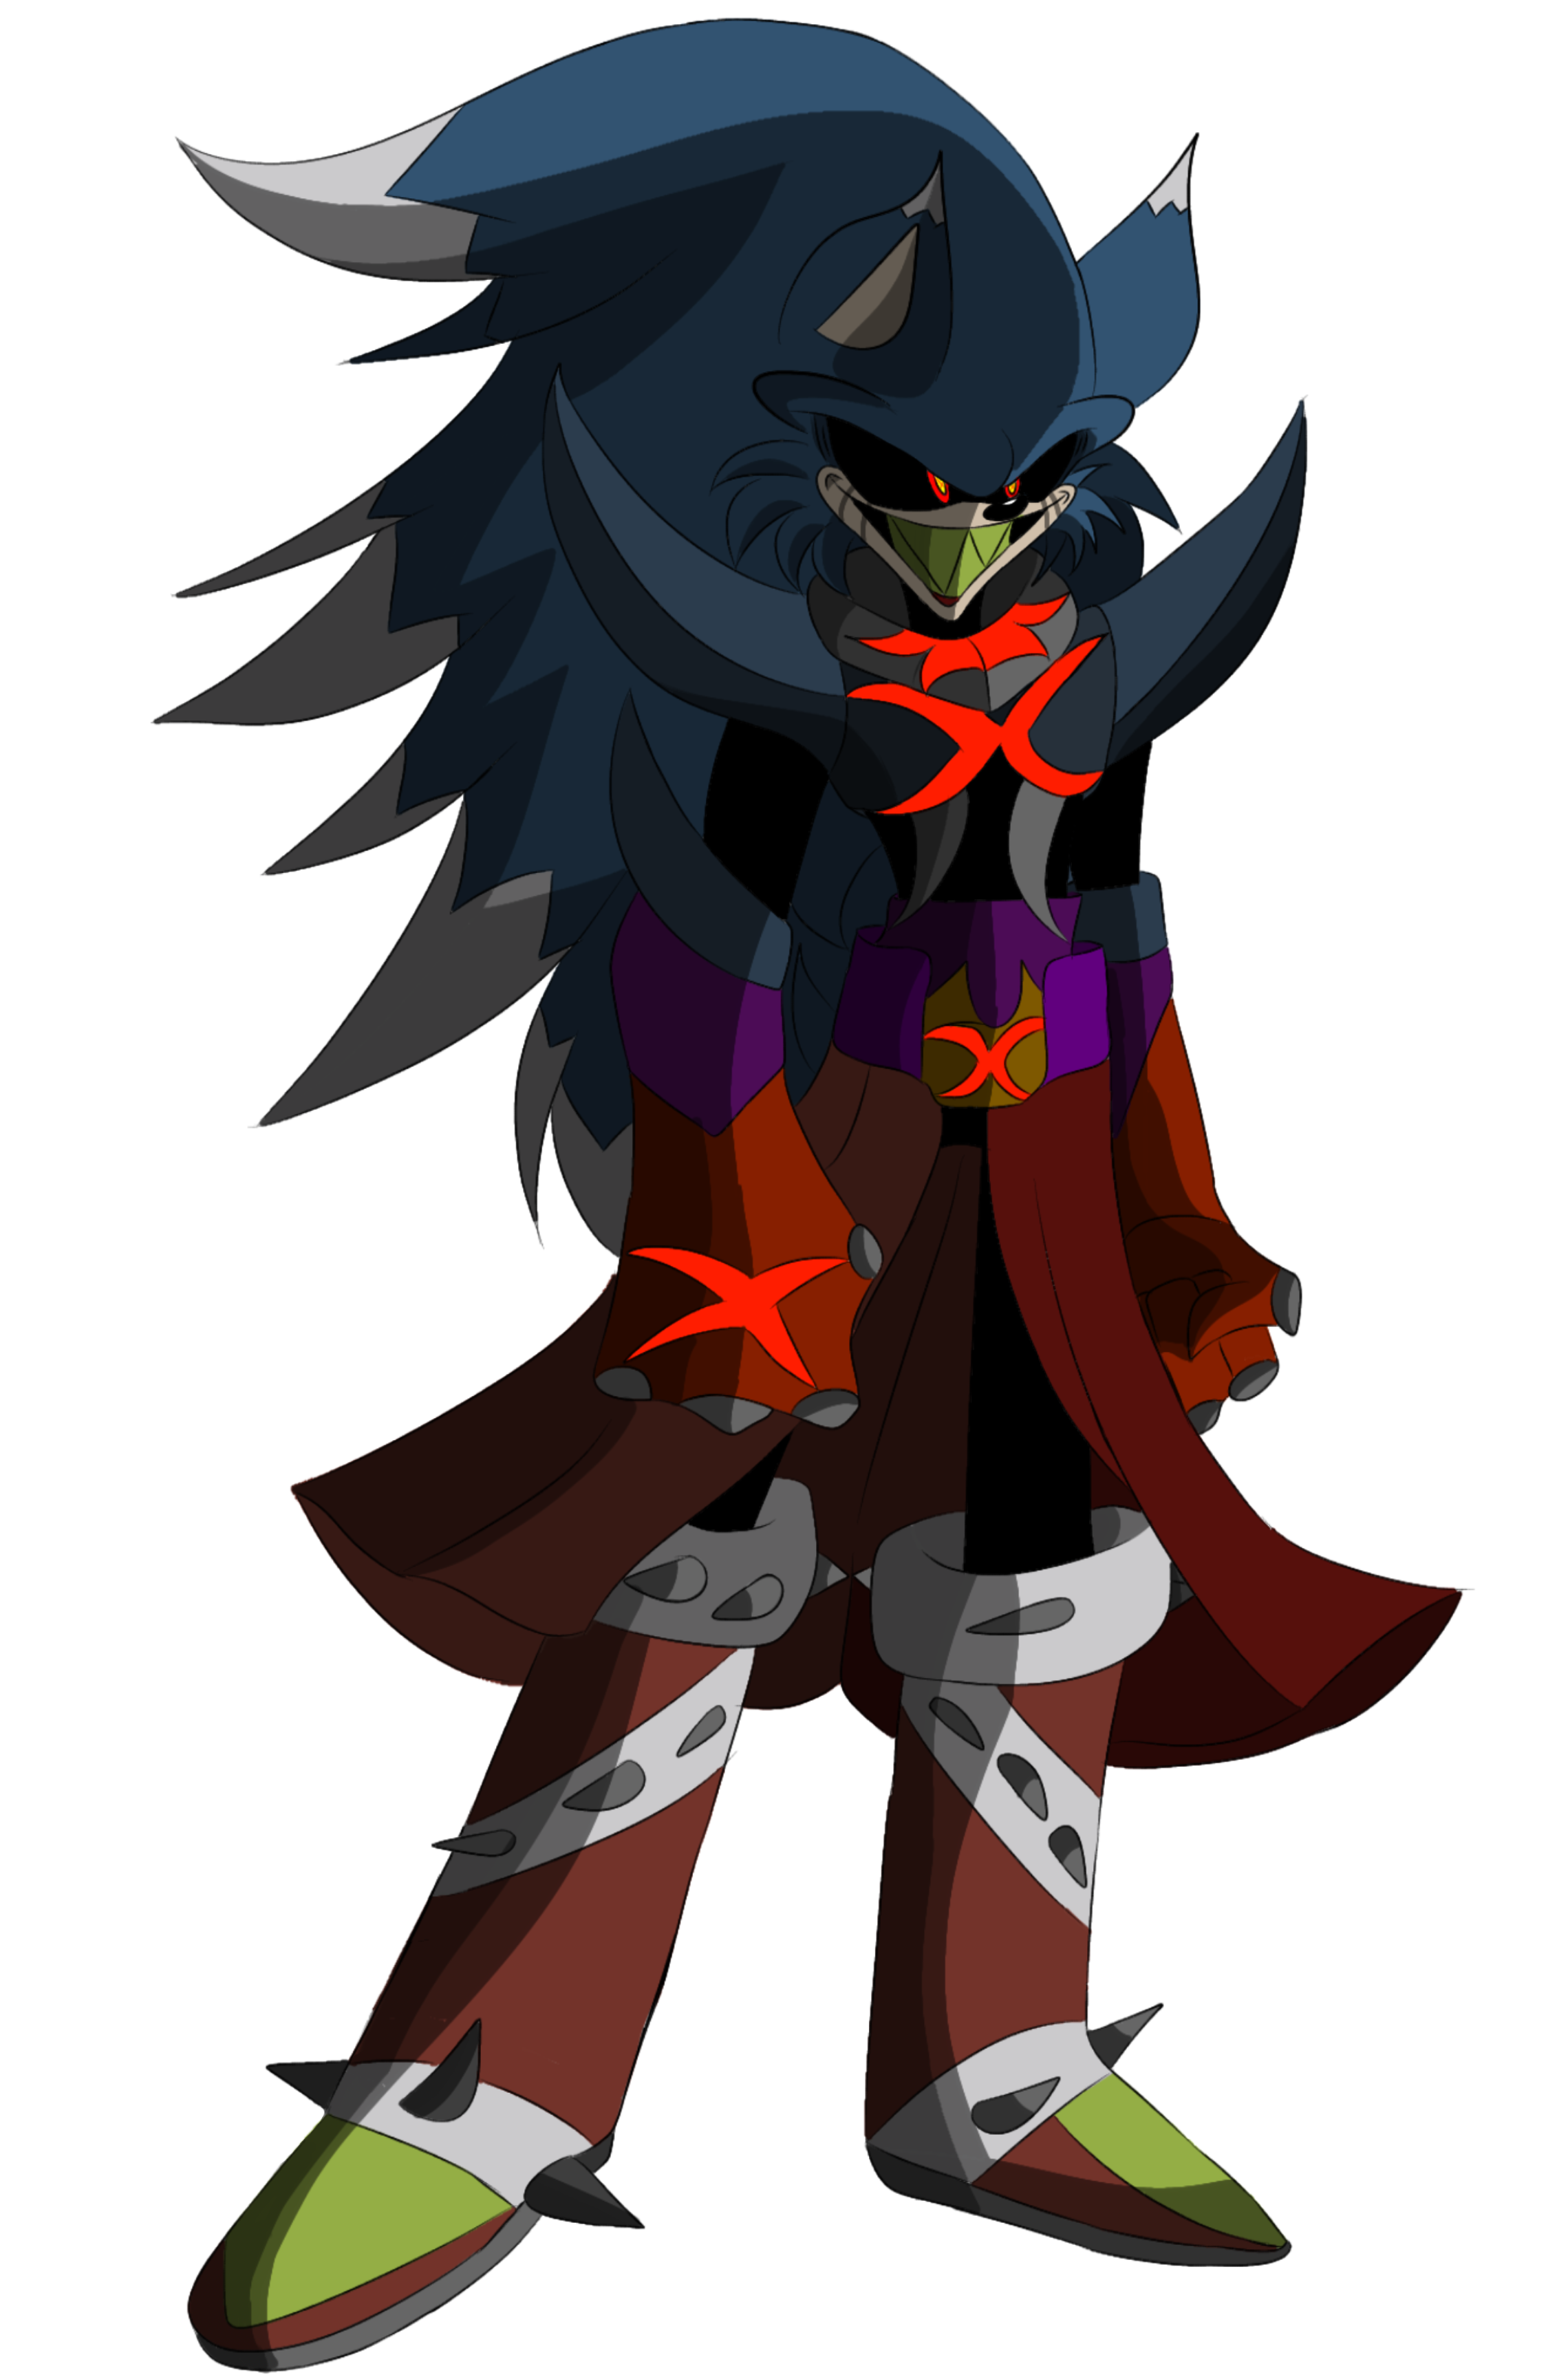 Lord x/Sonic exe by sharktrexl on DeviantArt